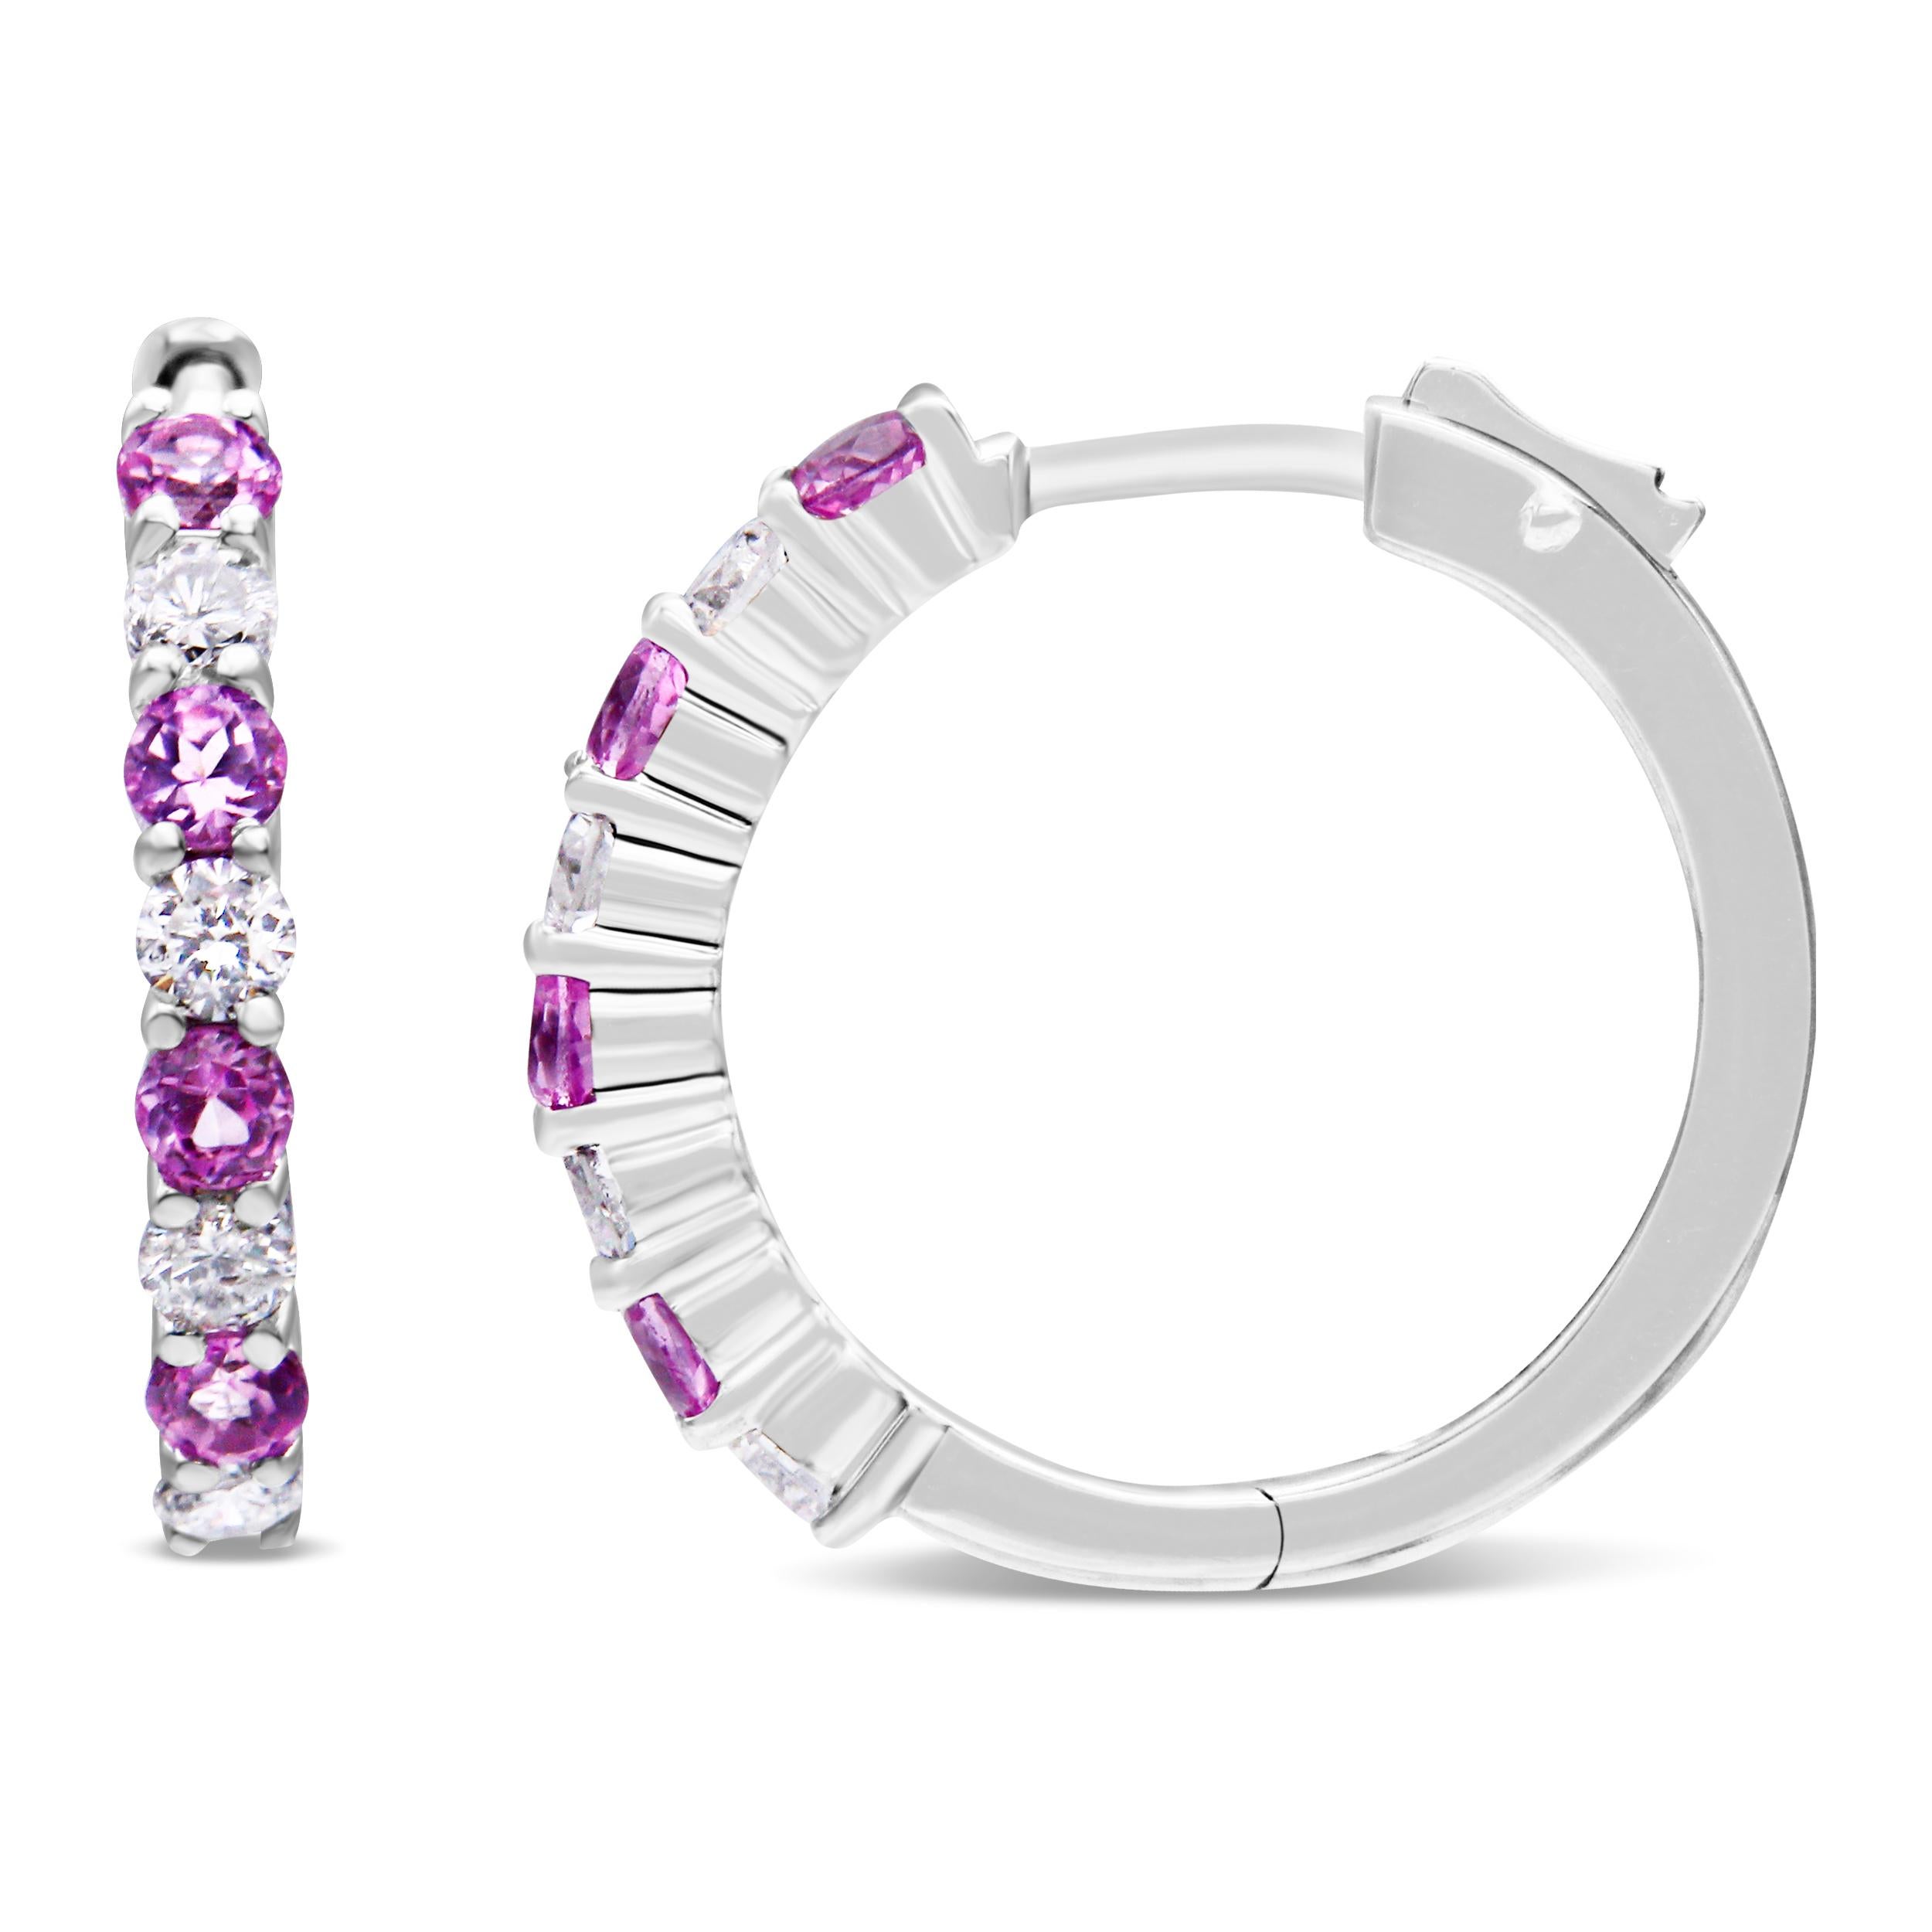 Contemporary 10K White Gold Pink Sapphire Gemstone and 1/2 Carat Diamond Hoop Earrings For Sale